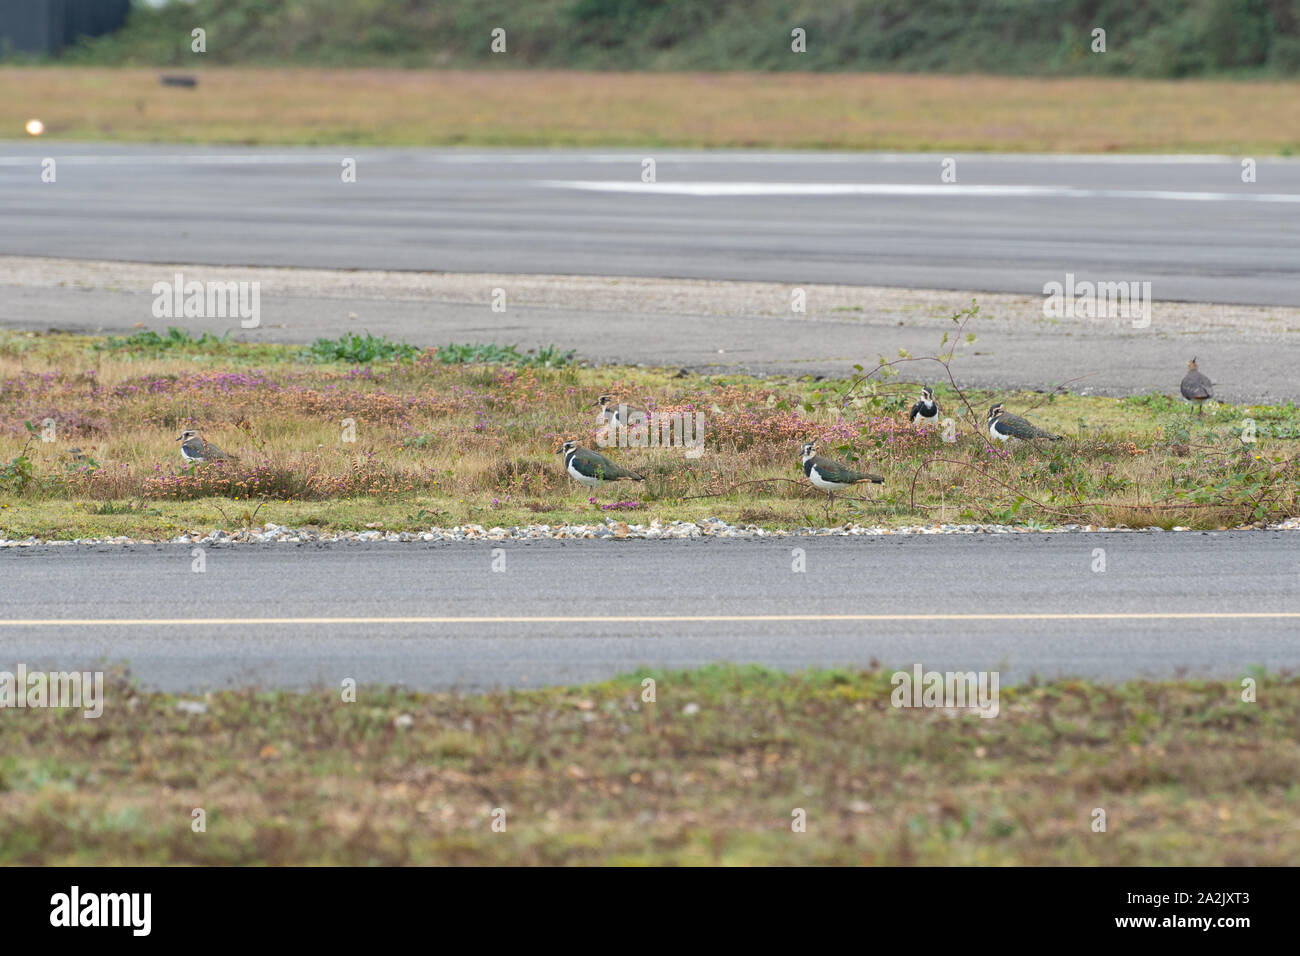 Small flock of lapwings on the grass beside the runway at Blackbushe Airport, UK Stock Photo